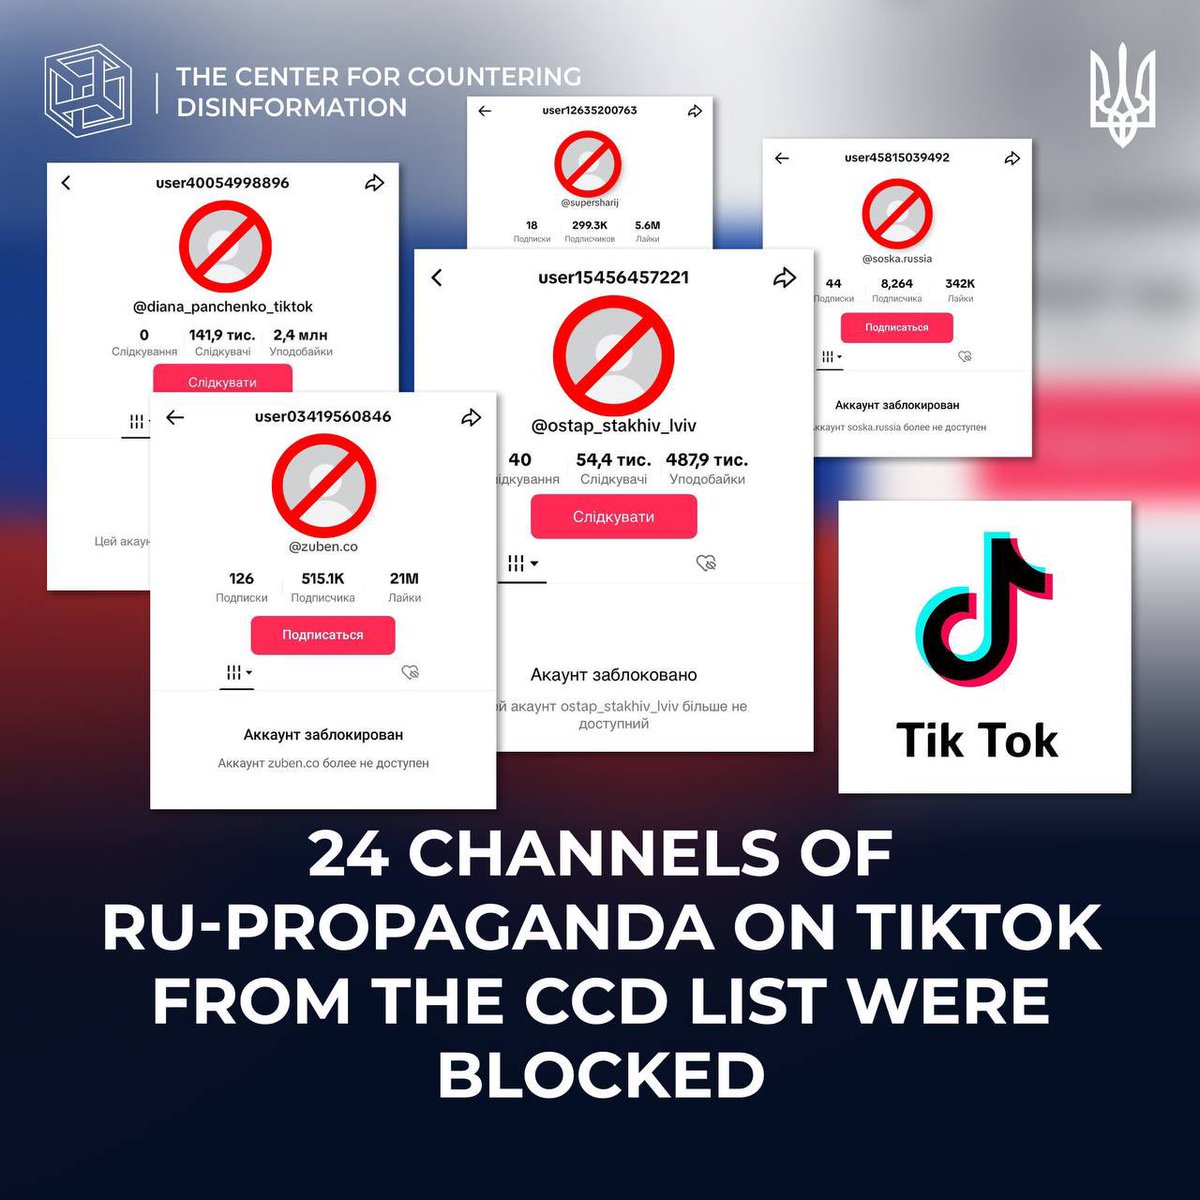 #CCD_informs:
 
As promised, the Center has begun the process of blocking the tools for spreading russian disinformation on TikTok.
 
We have already blocked 24 channels that promoted pro-russian narratives.